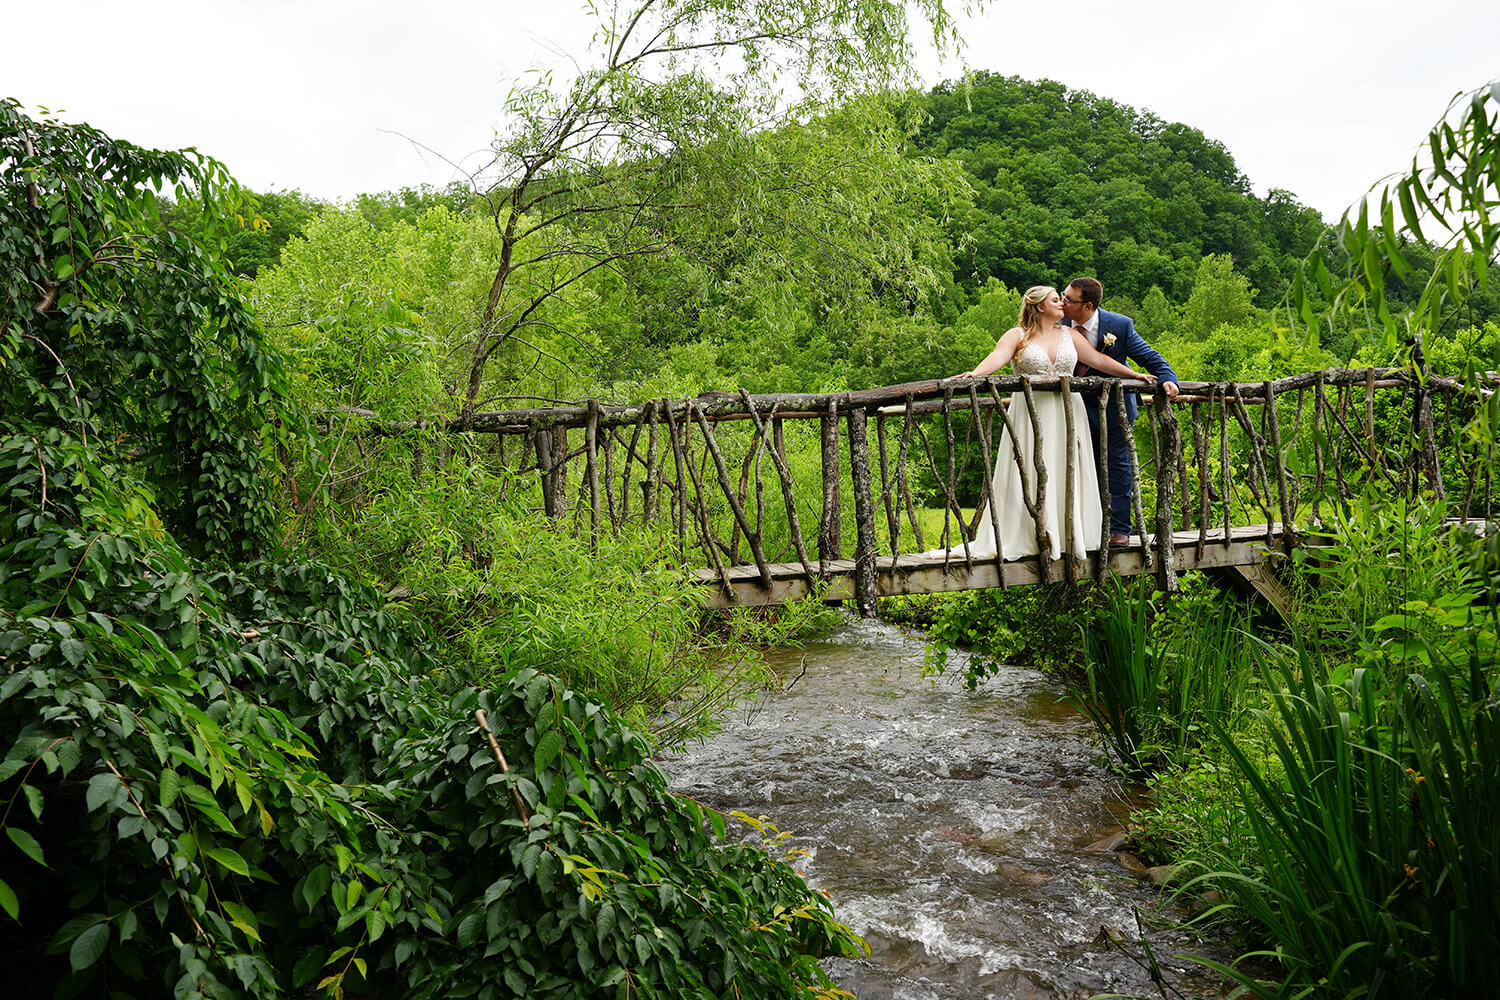 Wedding couple kissing on a tree limb hobbit bridge over a creek with a mountain ridge behind them at a wedding venue called Honeysuckle Hills in Pigeon Forge